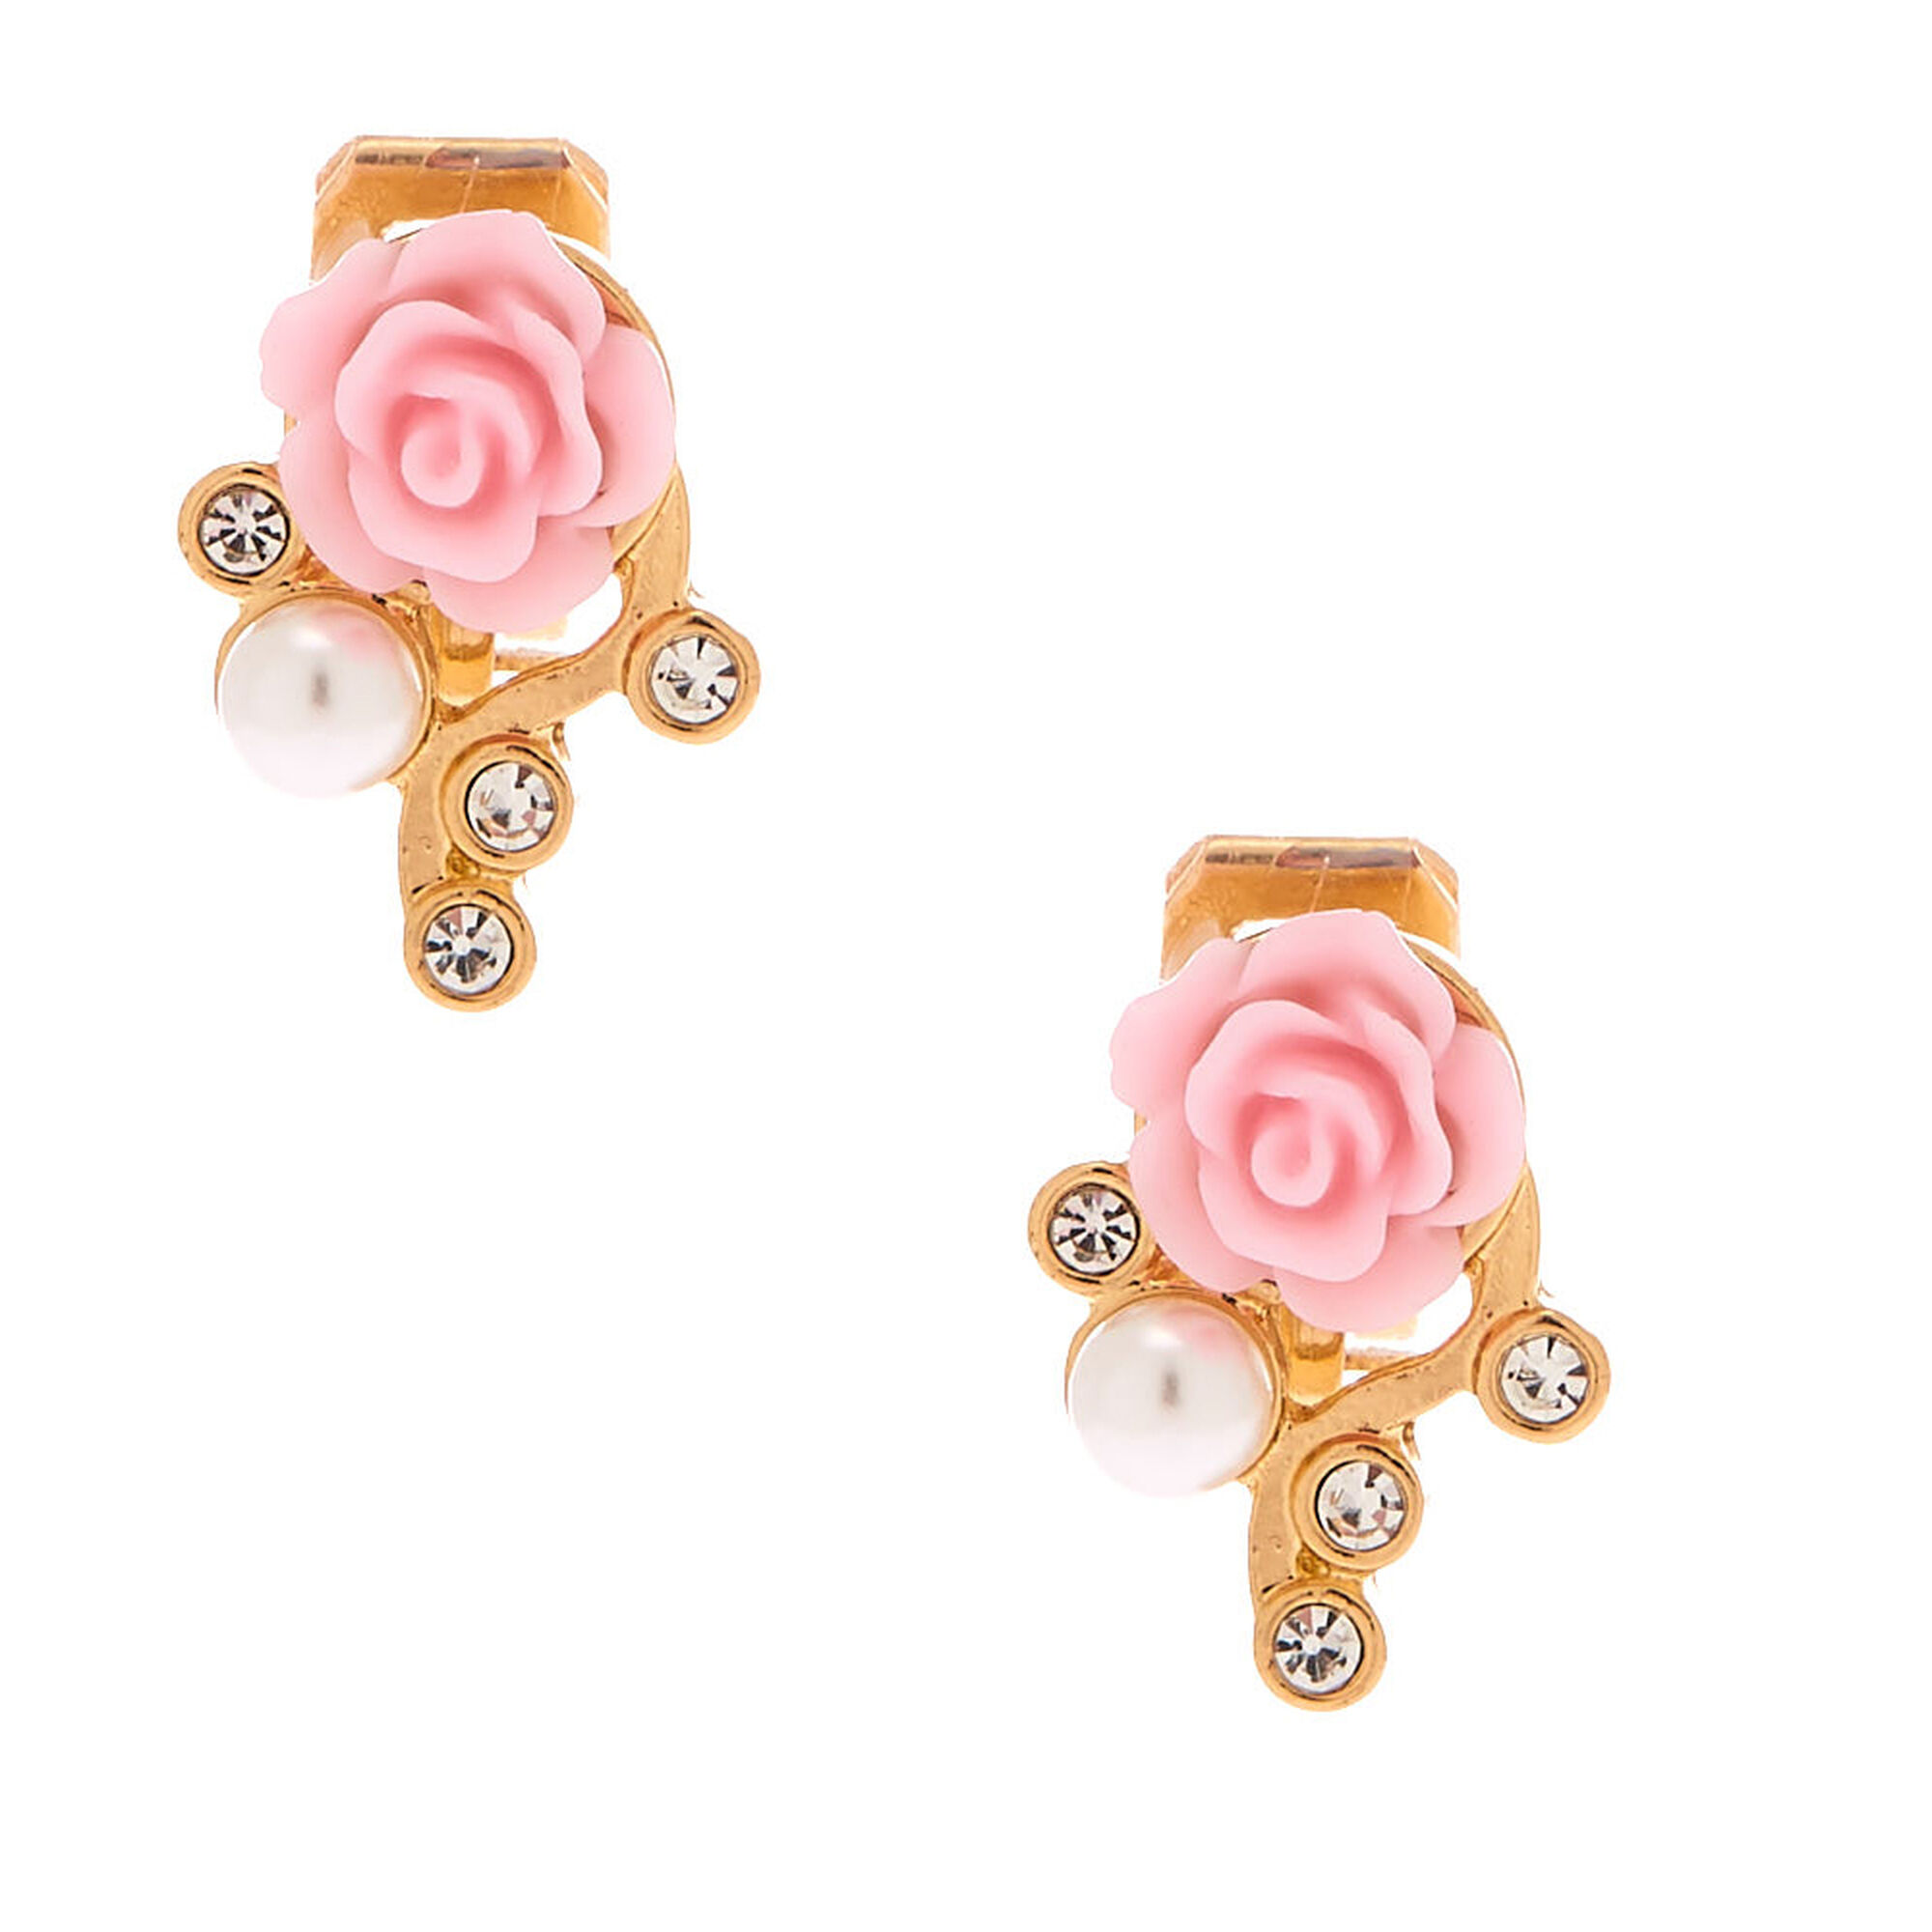 View Claires GoldTone Crystal Rose ClipOn Earrings Pink information